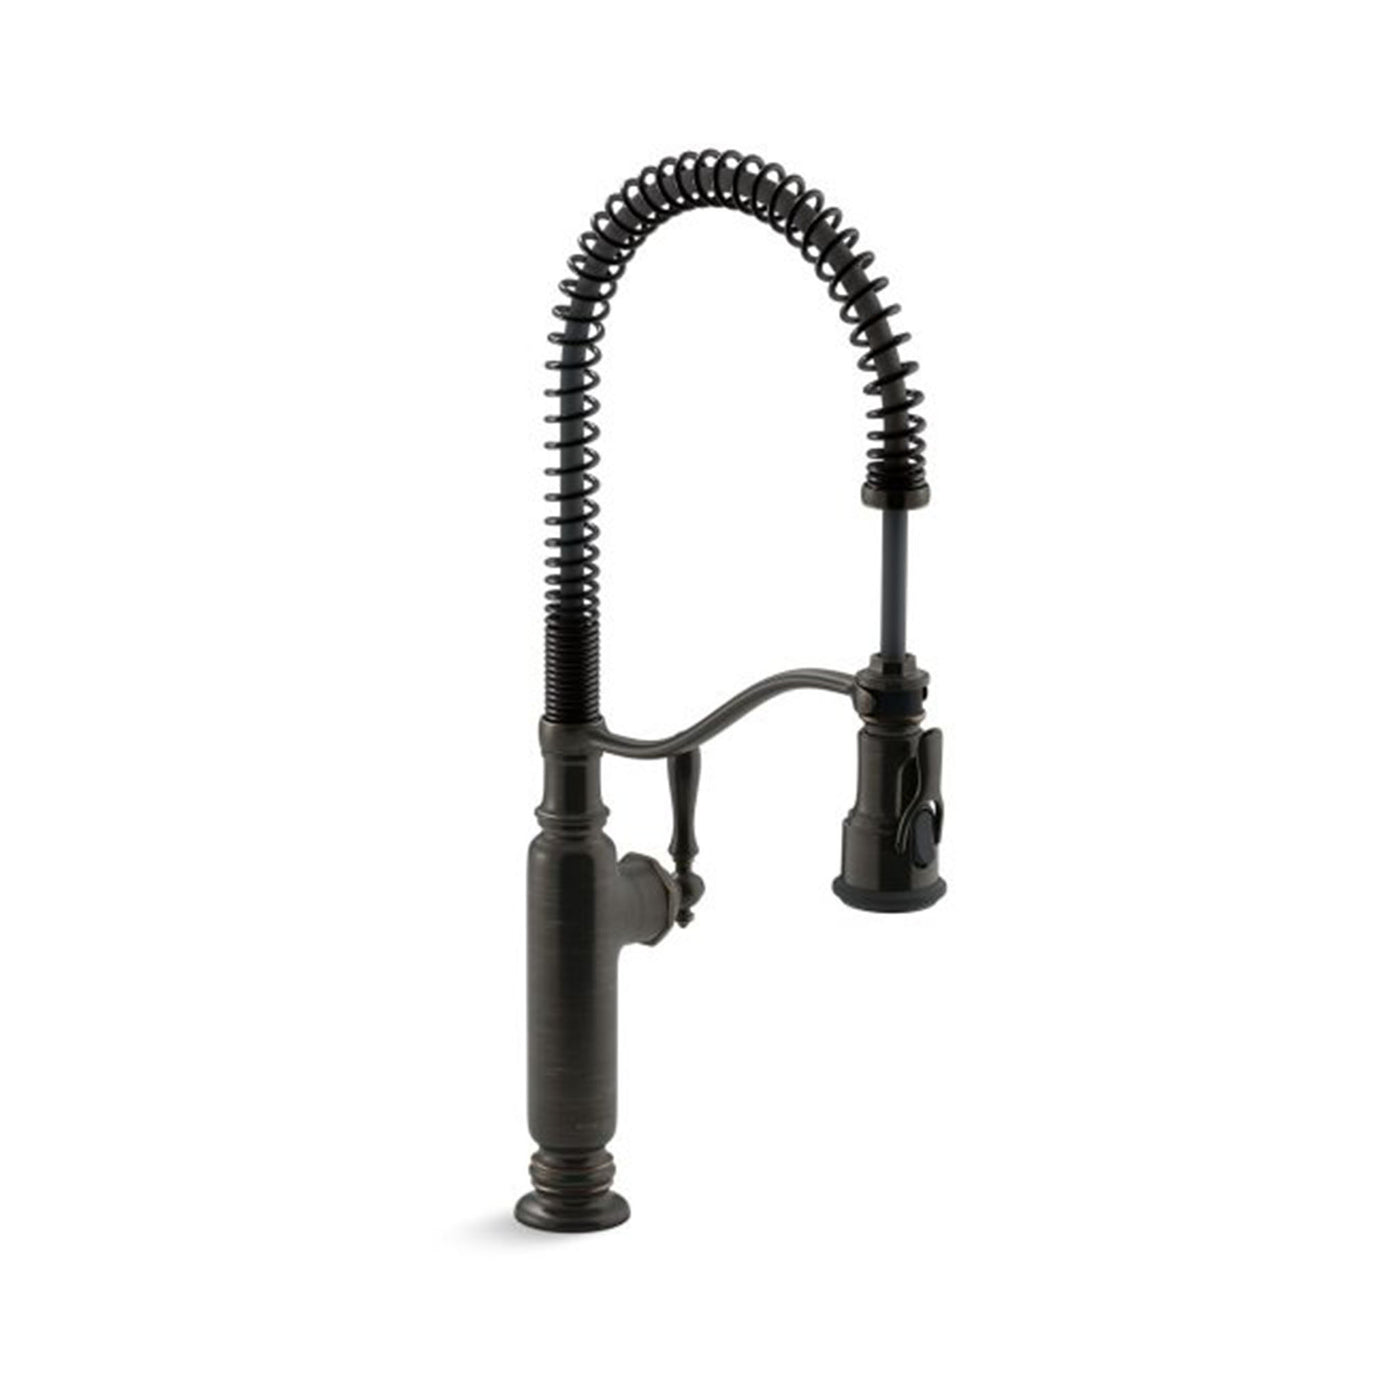 Tournant® Semi-professional kitchen sink faucet with three-function sprayhead